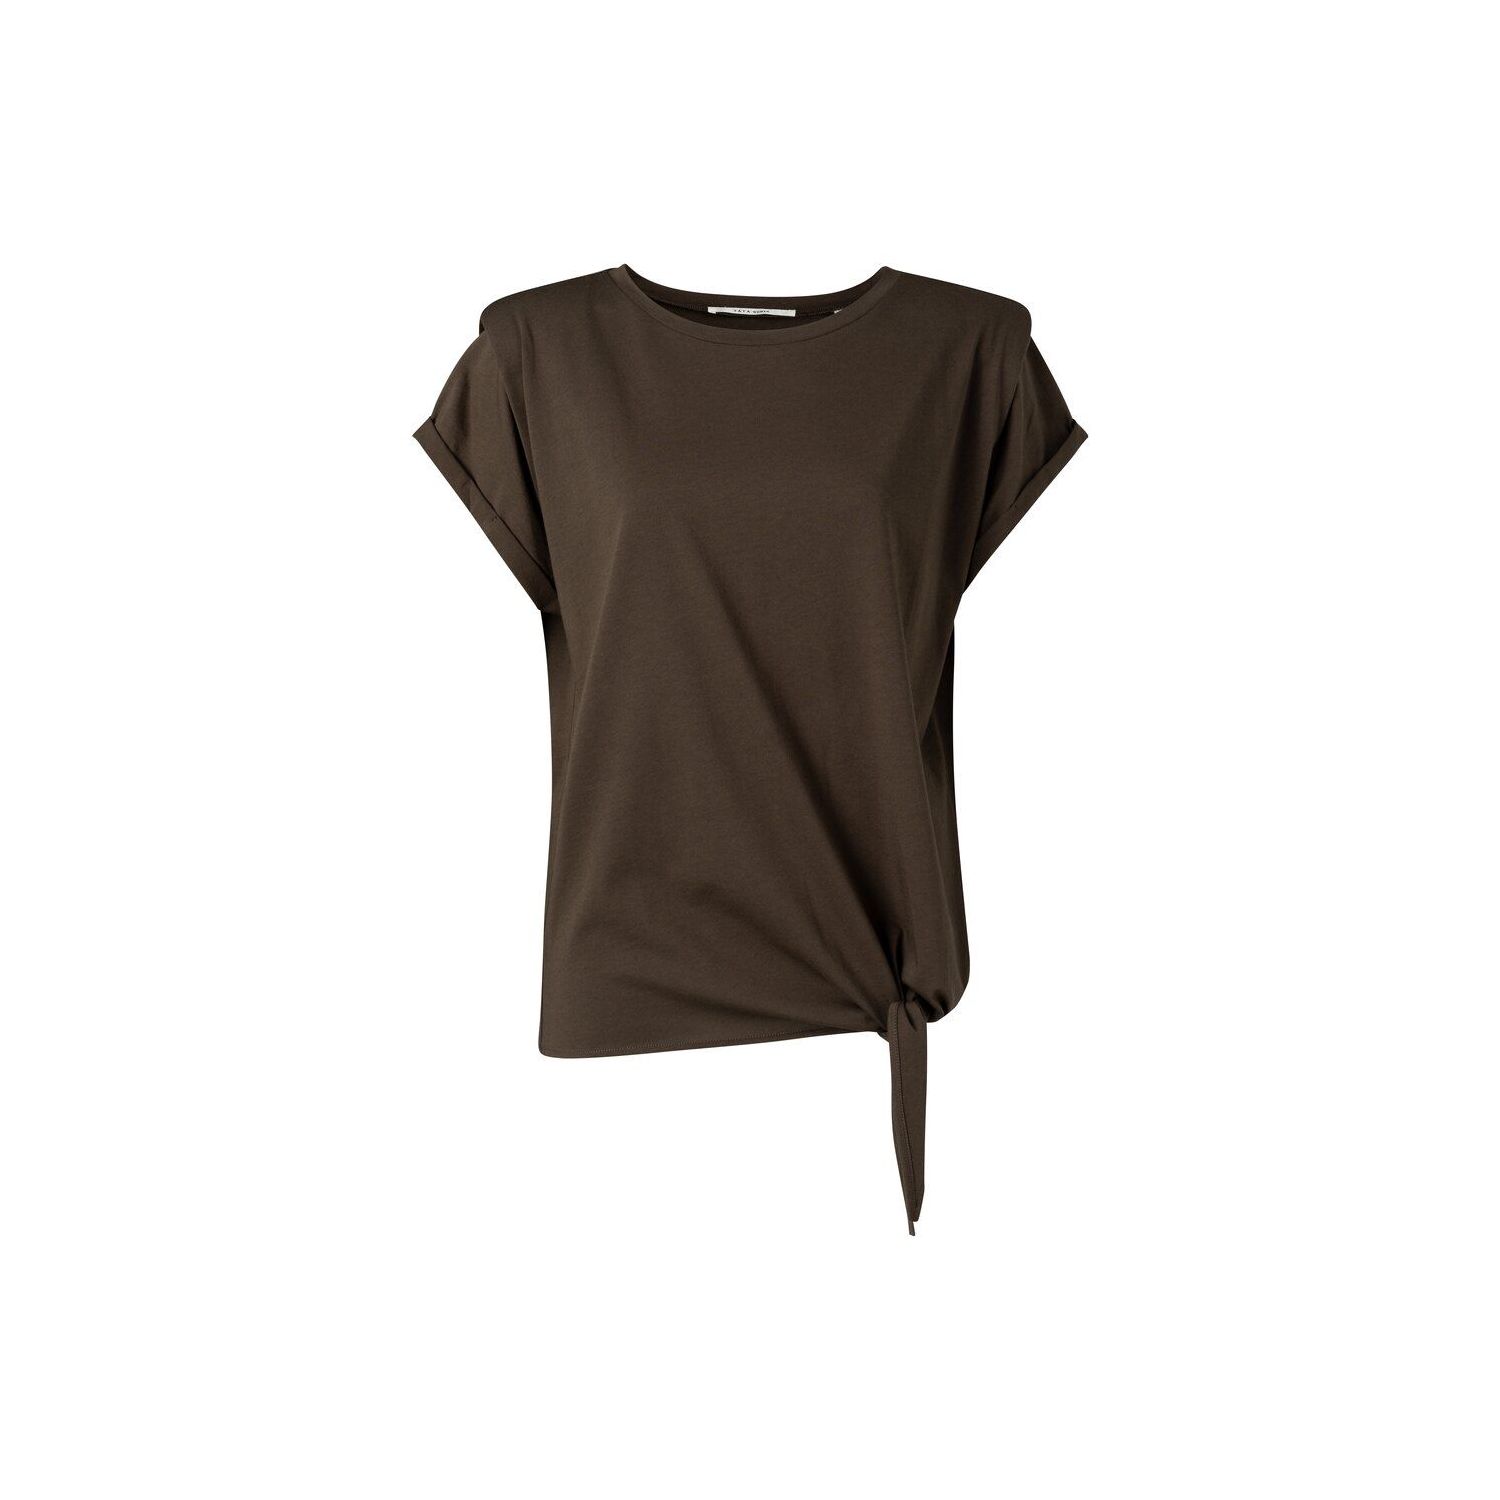 YAYA top with shoulder detail knot at front coffee